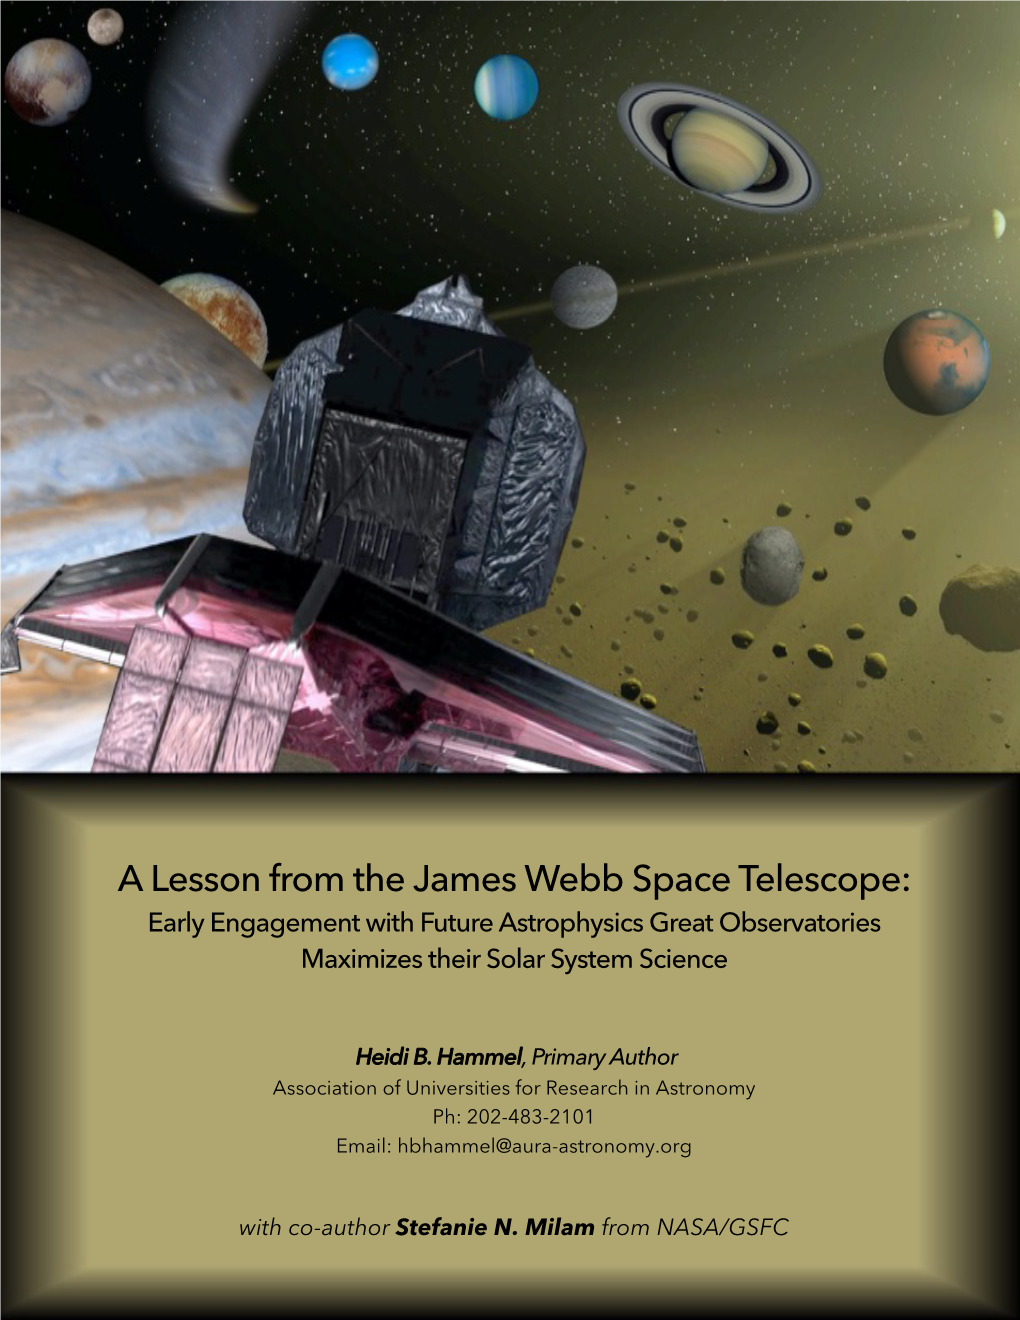 A Lesson from the James Webb Space Telescope: Early Engagement with Future Astrophysics Great Observatories Maximizes Their Solar System Science